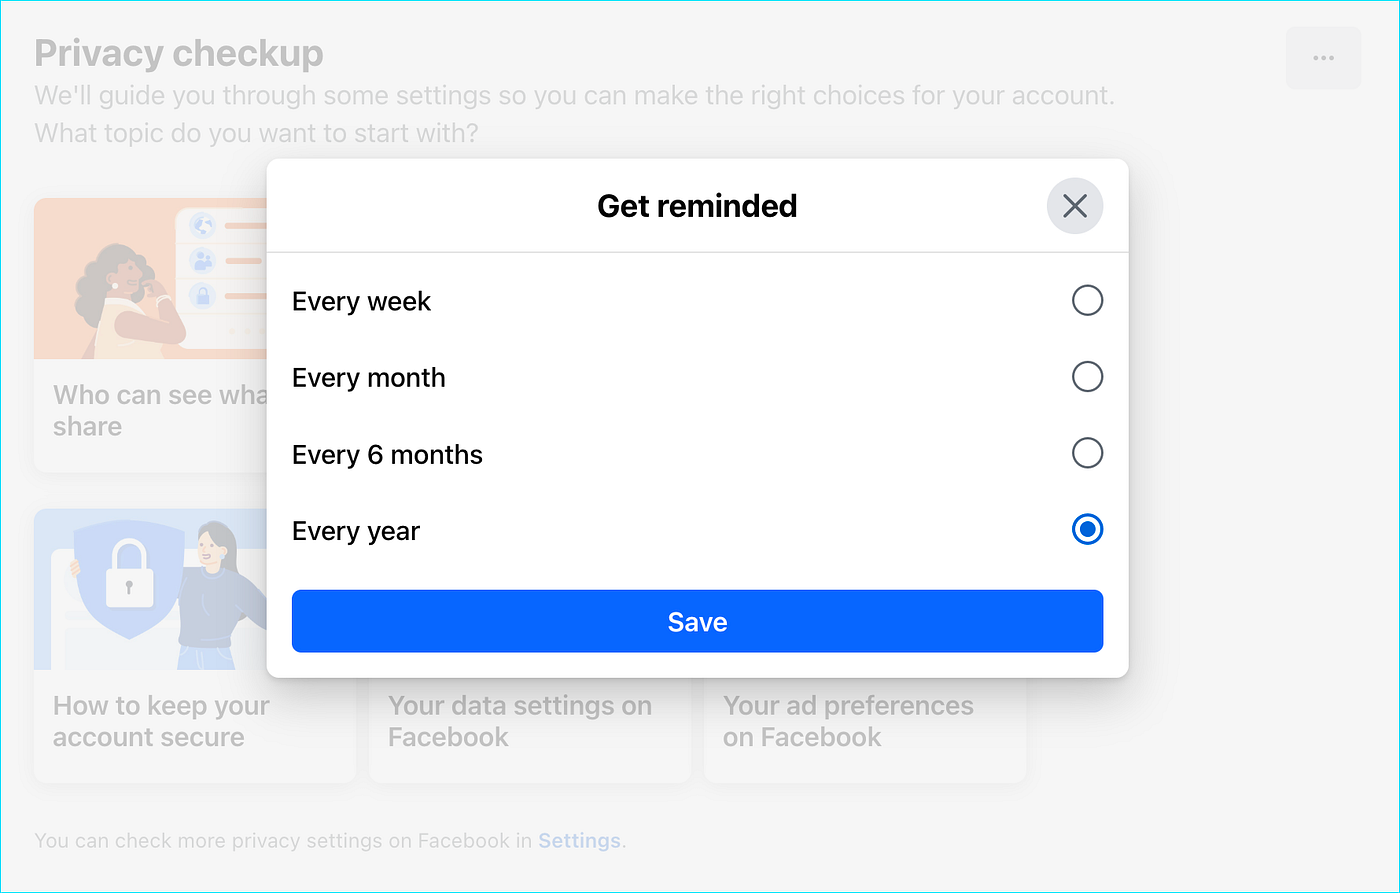 Screenshot of a “Get Reminded” overlay within Facebook’s privacy checkup, which allows the user to select a reminder for every week, month, six months, or year.